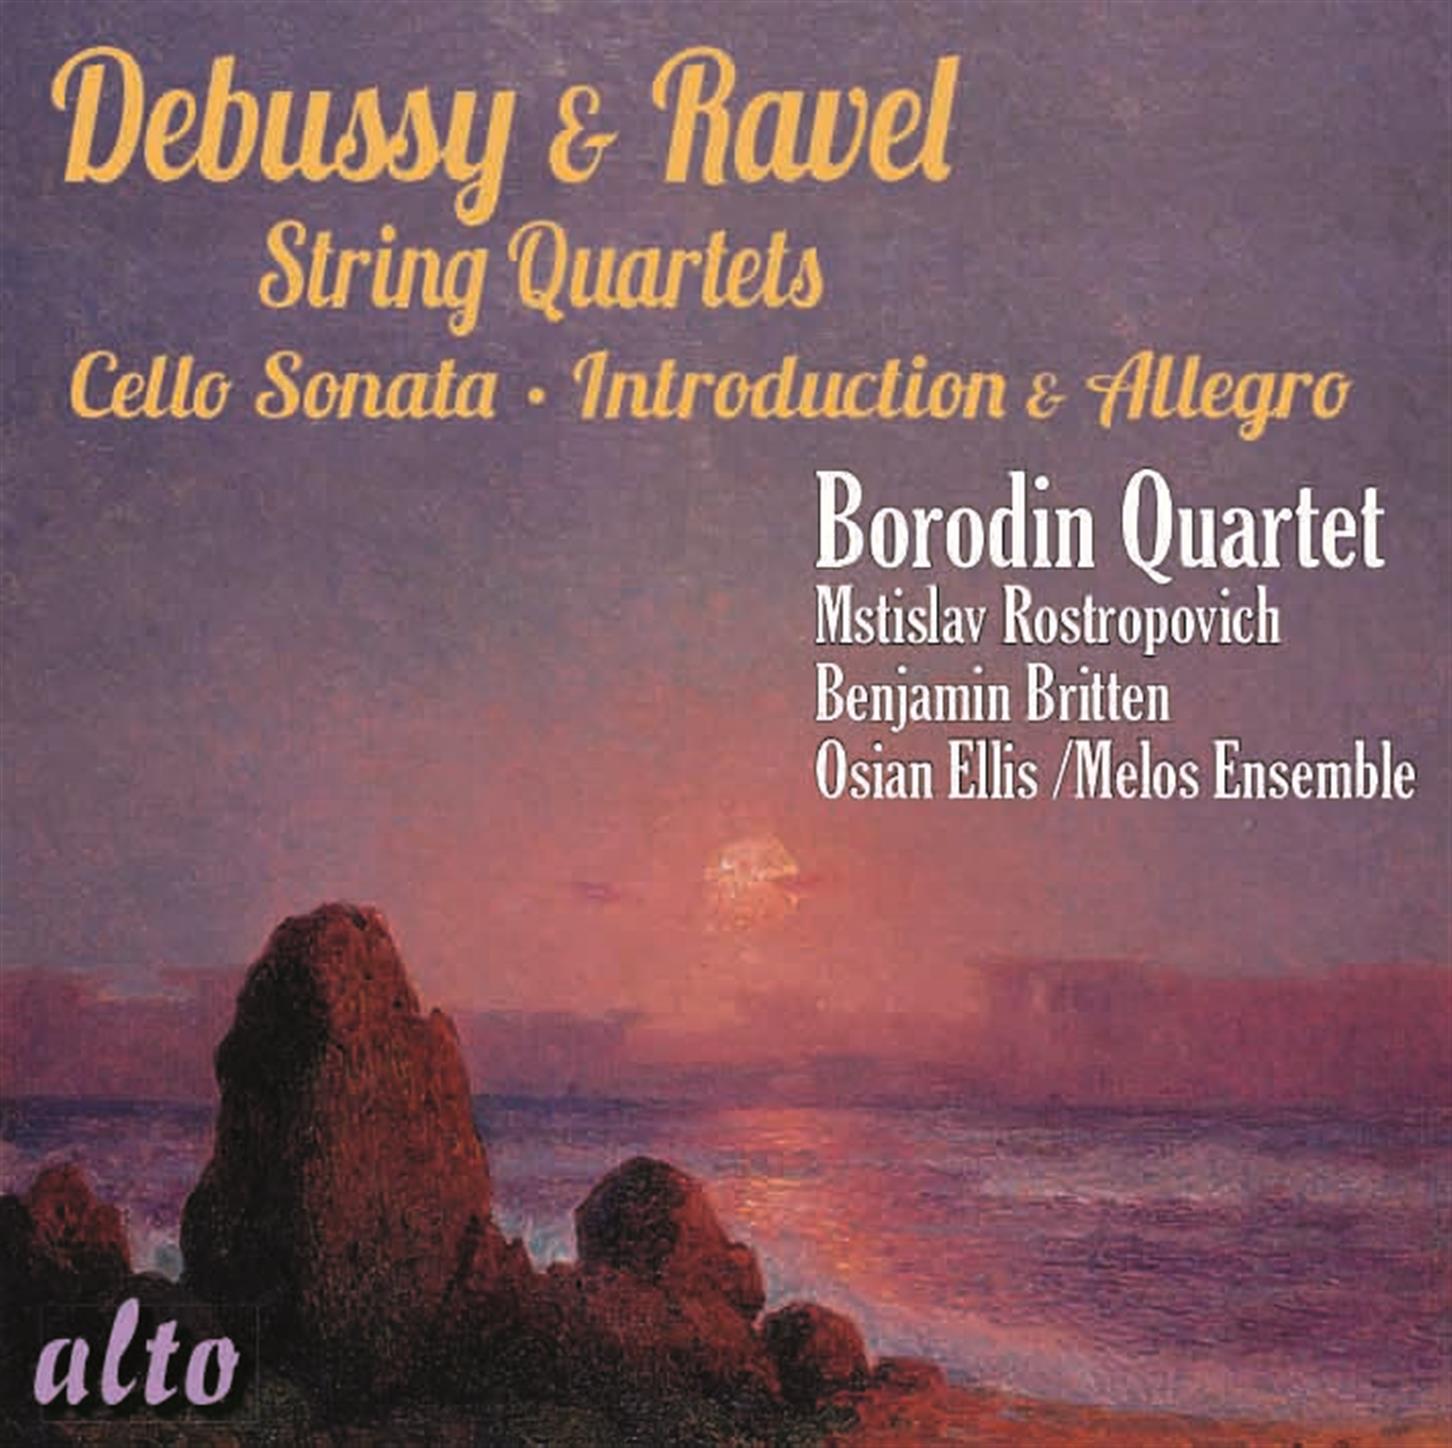 String Quartet in G Minor Op. 10: III. Andantino, doucement expressif